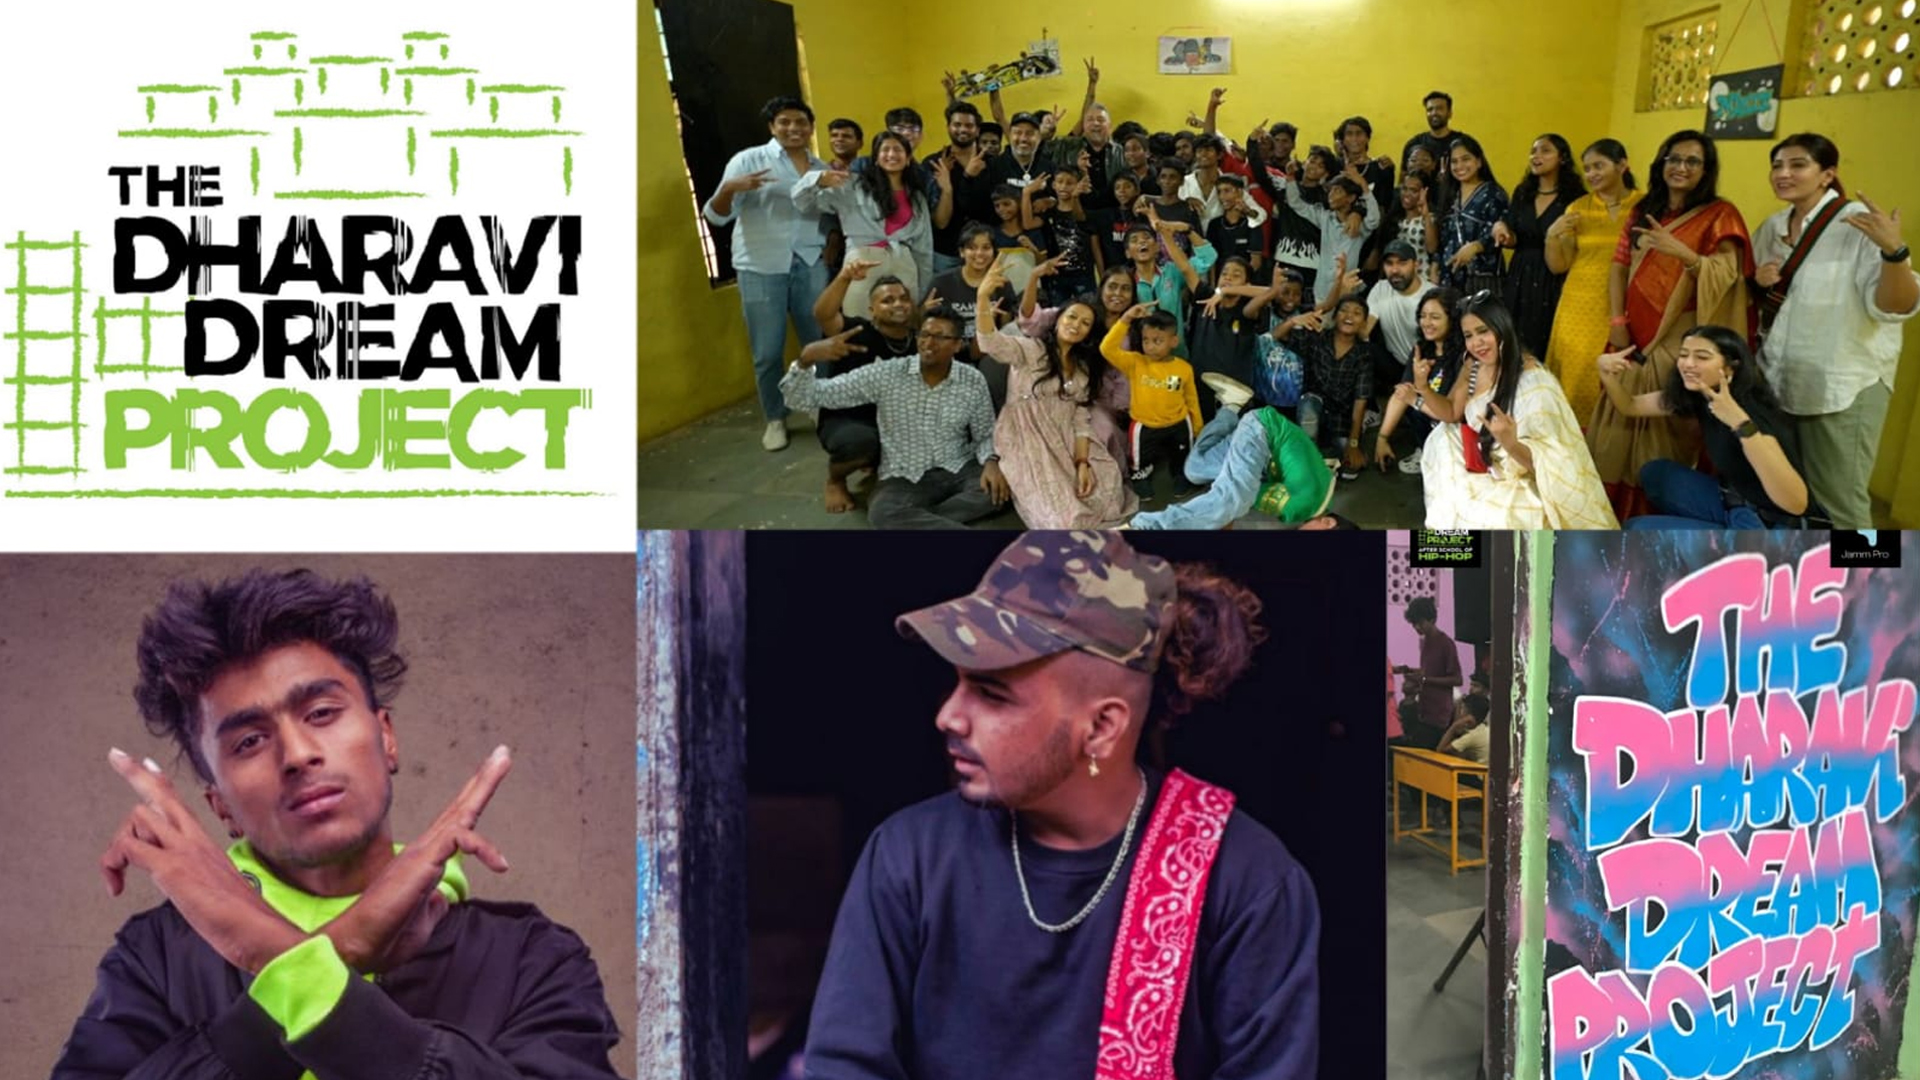 After collaborating with Badshah, The Dharavi Dream Project is set to take dance revolution to a whole new level with engaging LIVE shows